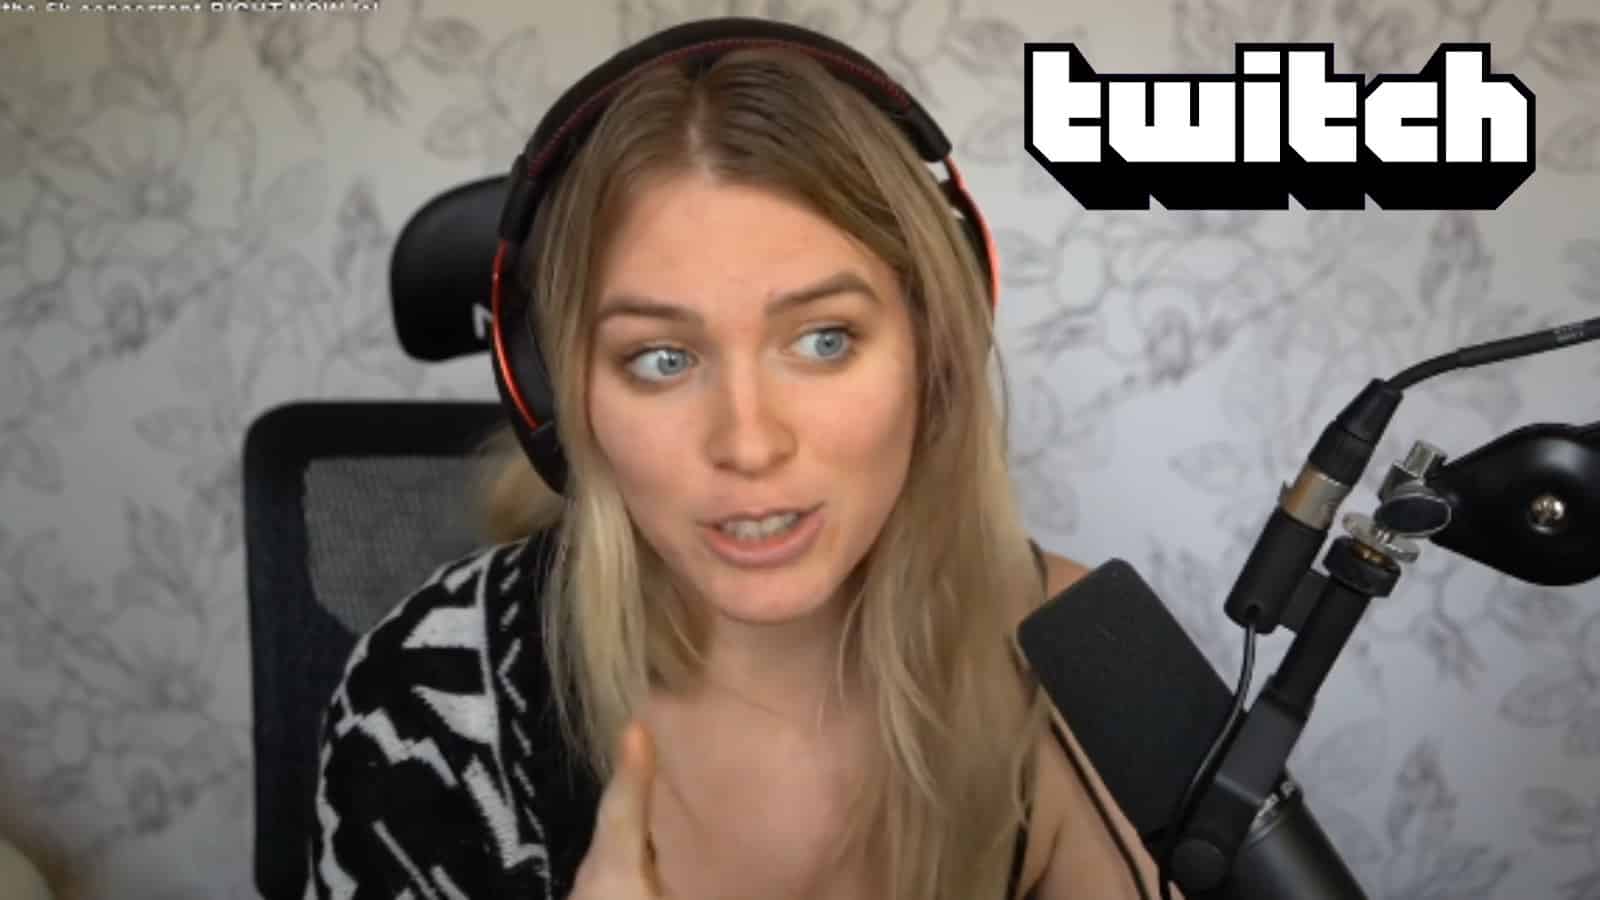 QTCinderella reveals she was bullied before blowing up on Twitch - Dexerto